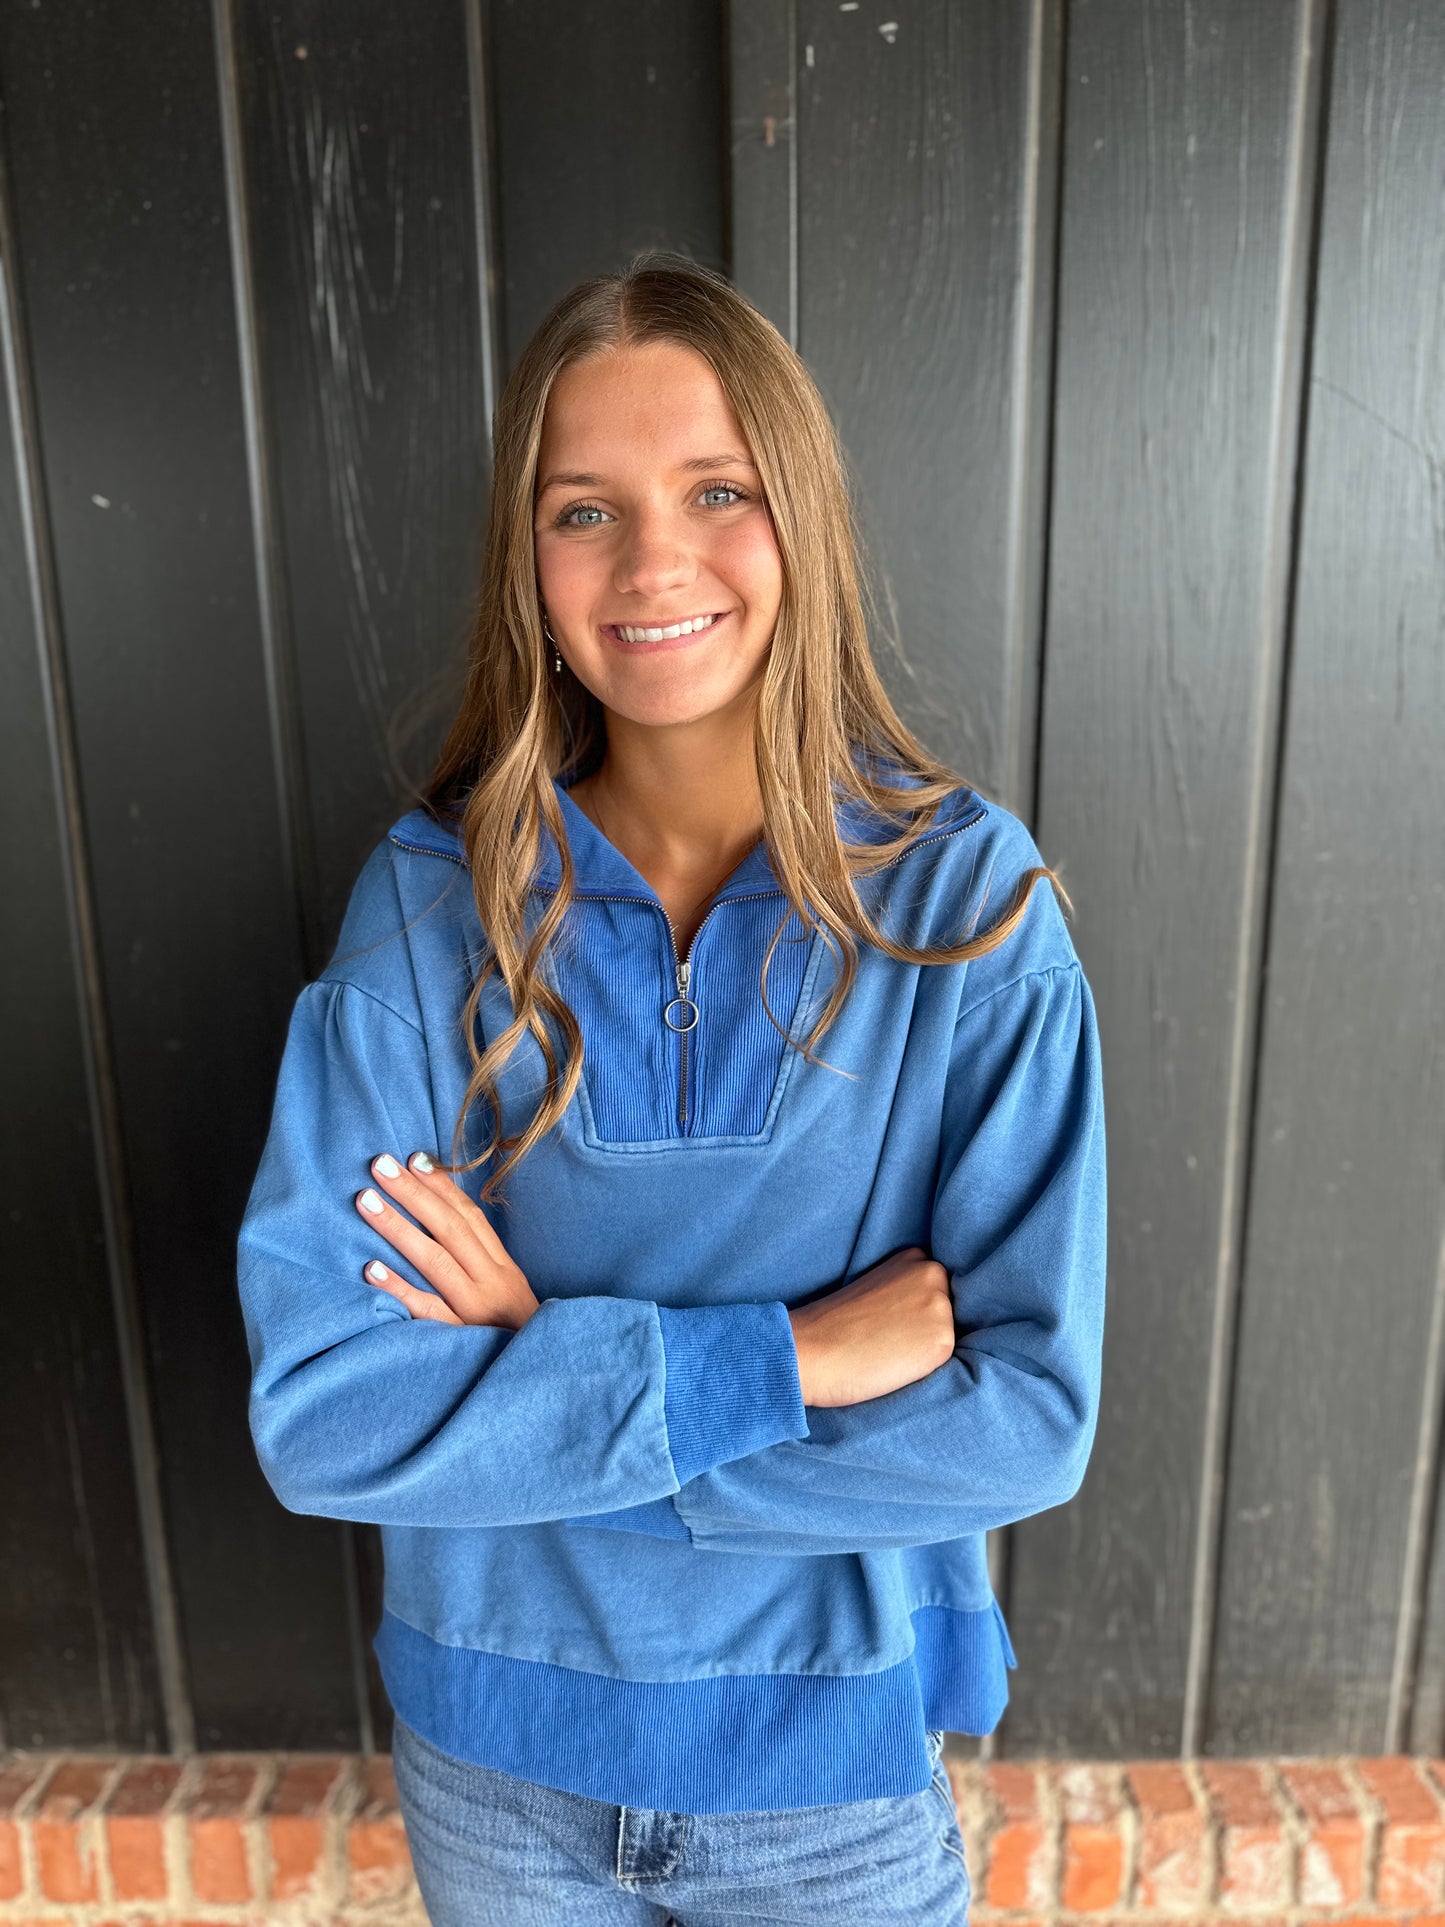 The Saylor Blue Mineral Wash Zip up Top